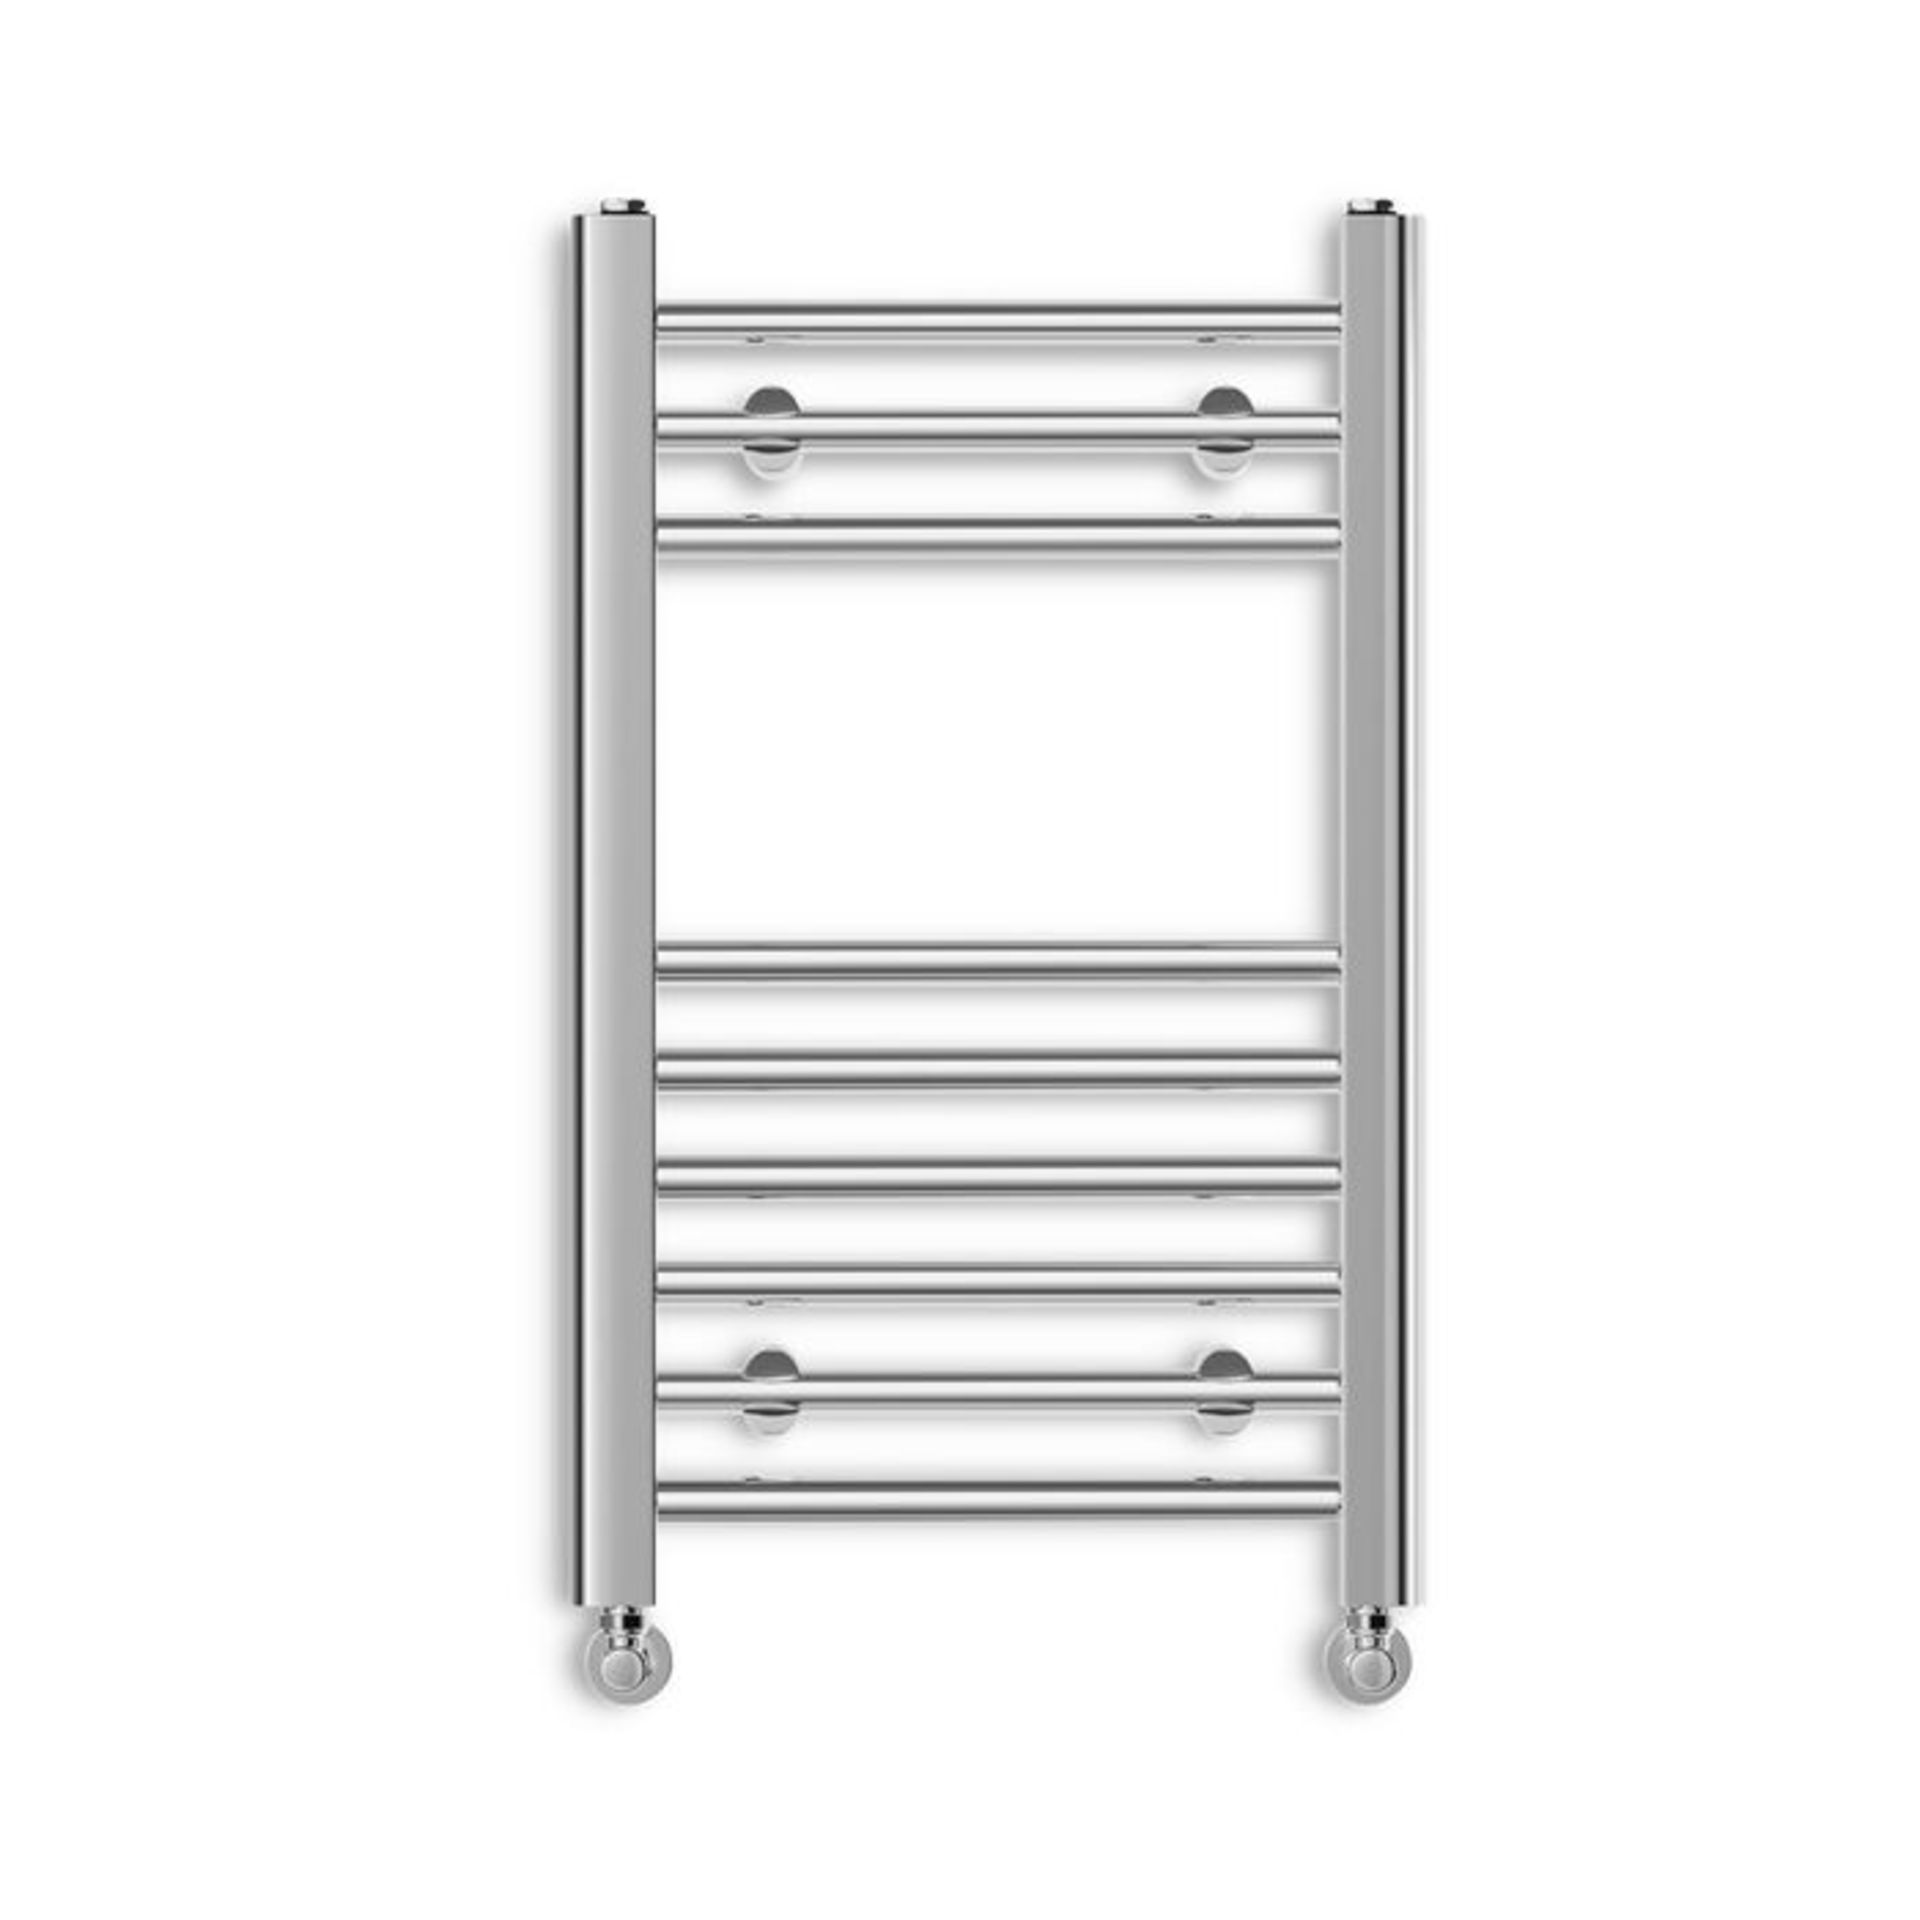 (ZL54) 650x400mm Straight Heated Towel Radiator. Low carbon steel chrome plated radiator. This - Image 2 of 2